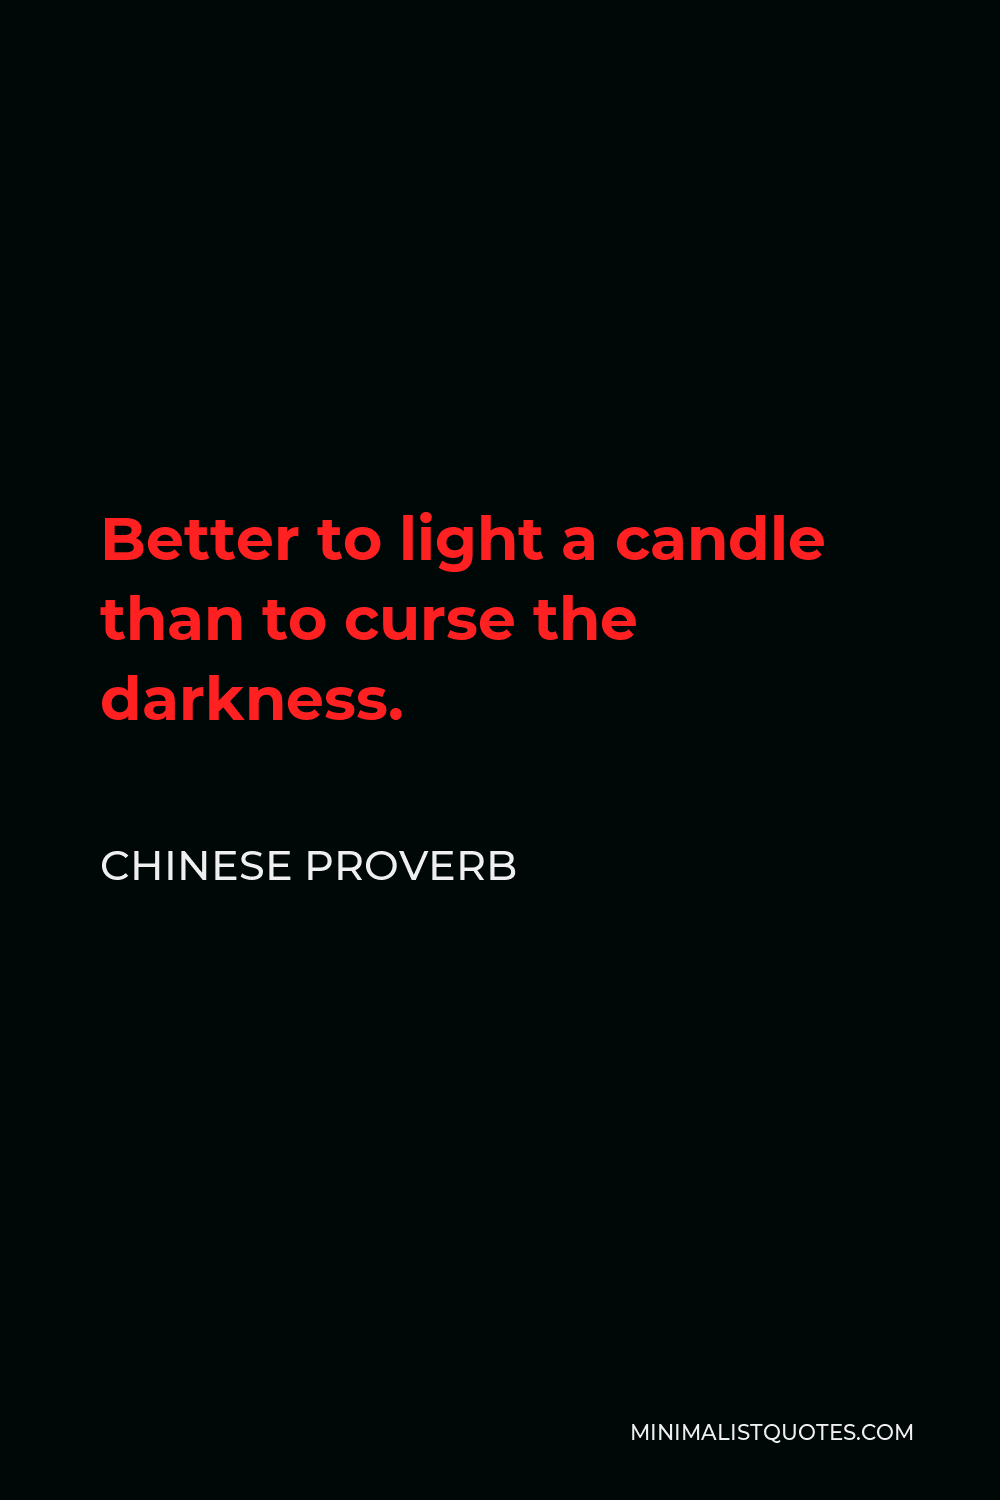 Chinese Proverb Quote - Better to light a candle than to curse the darkness.